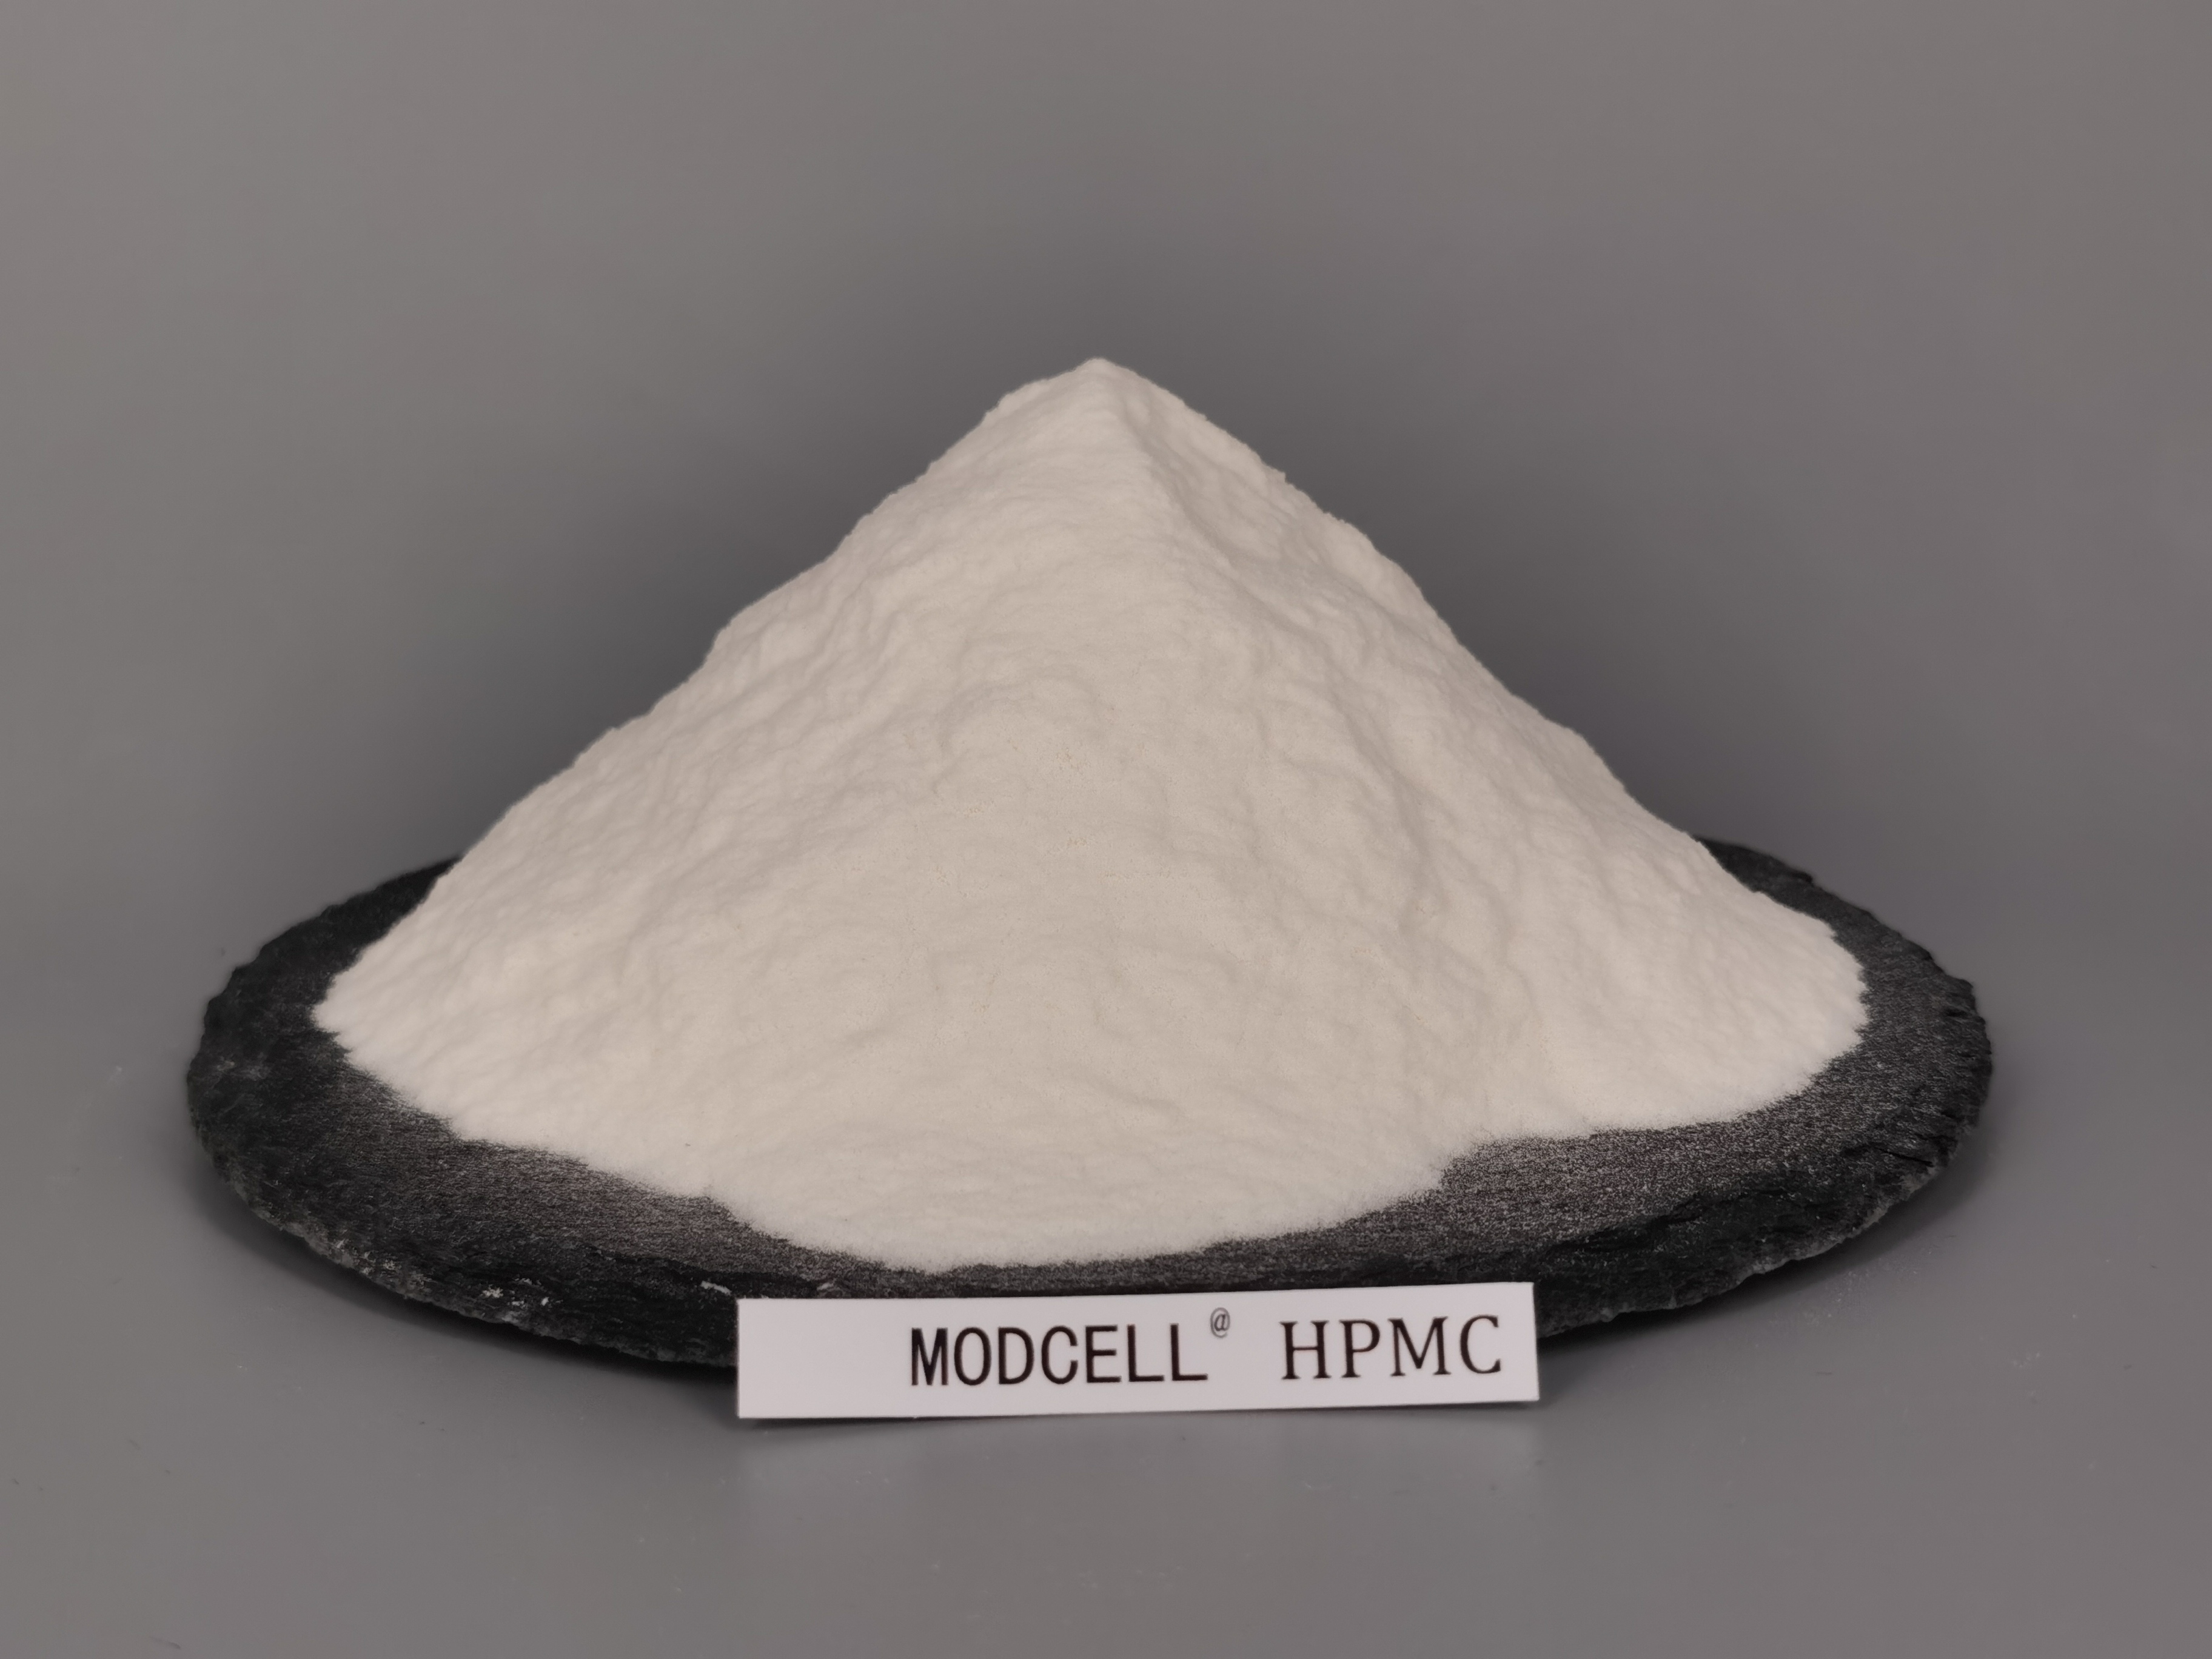 What is methyl cellulose ether used for? How is cellulose ether made?